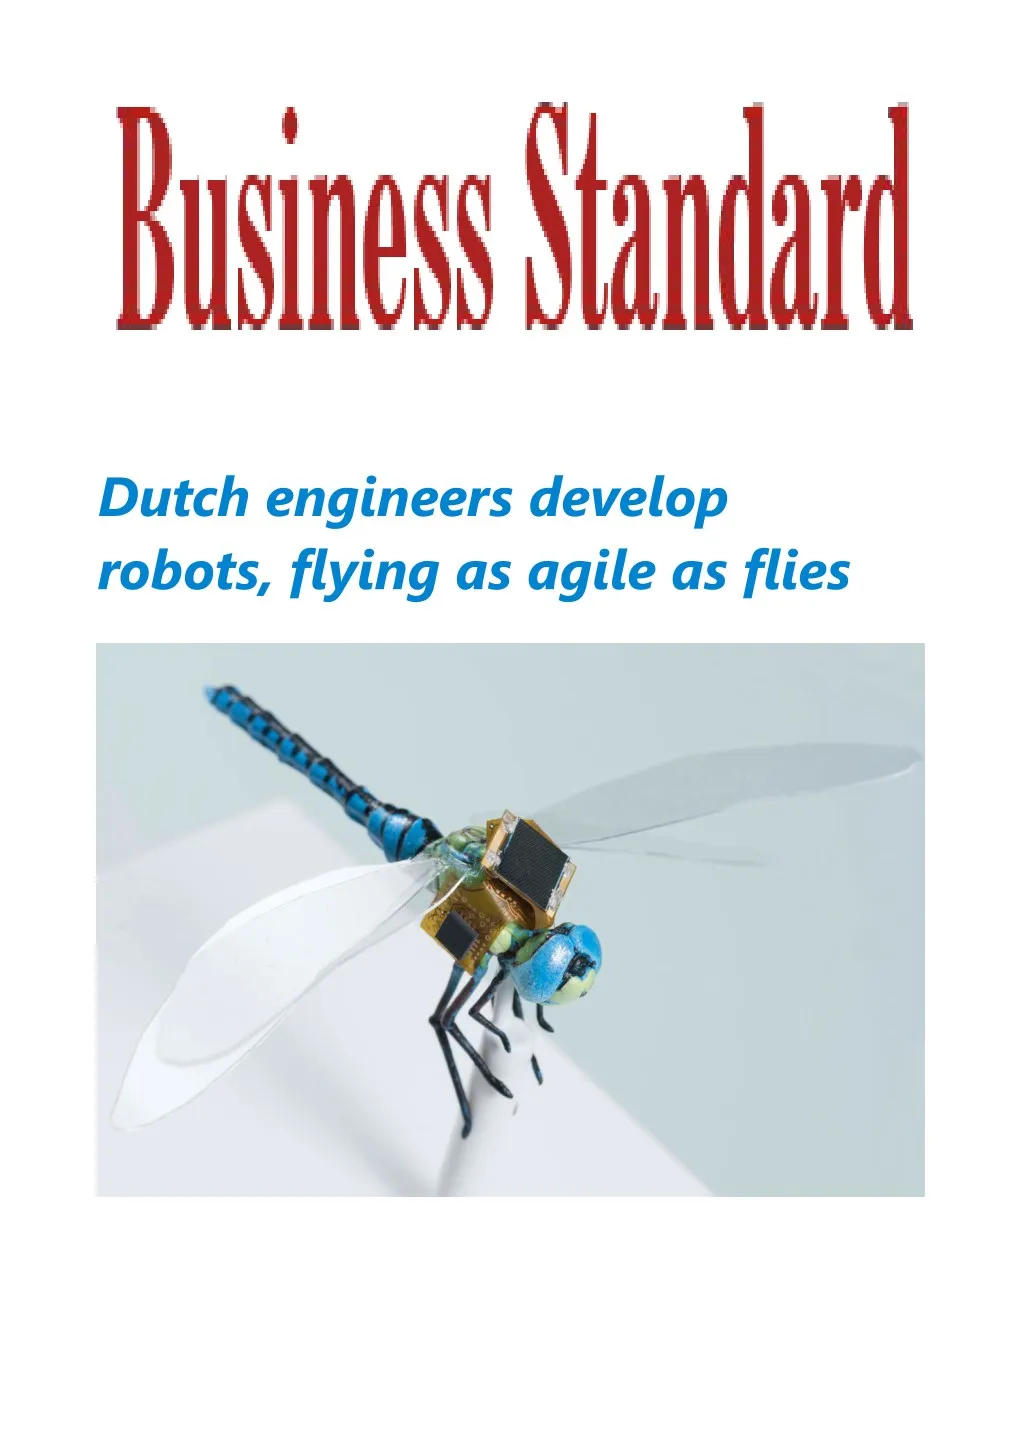 dutch engineers develop robots flying as agile